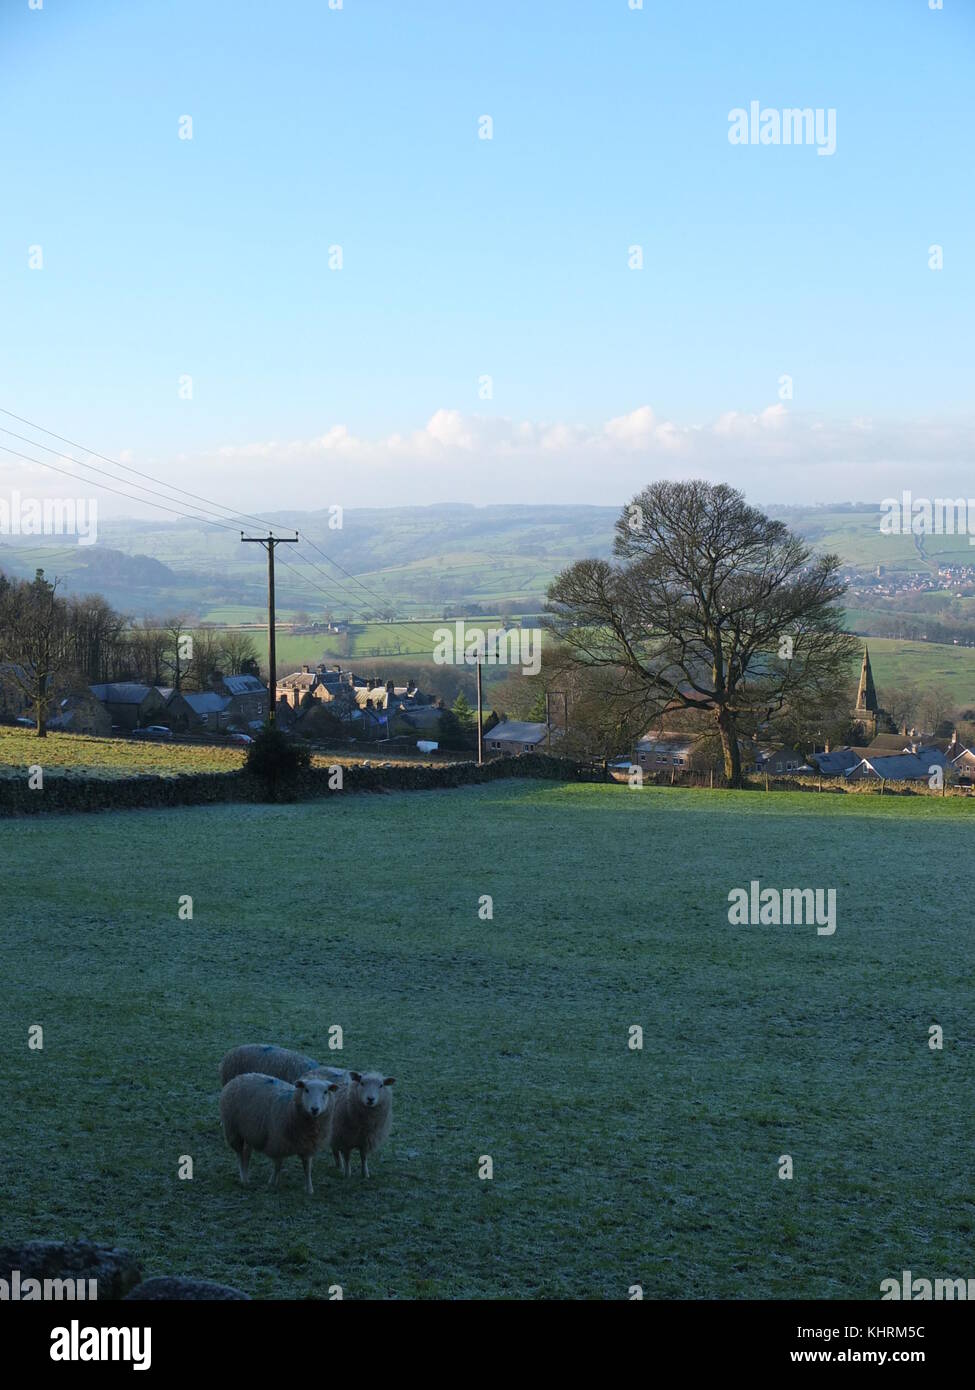 Three sheep huddle together on a frosty winter's day with the Derbyshire Peak District village of Stanton in Peak in the background. Stock Photo